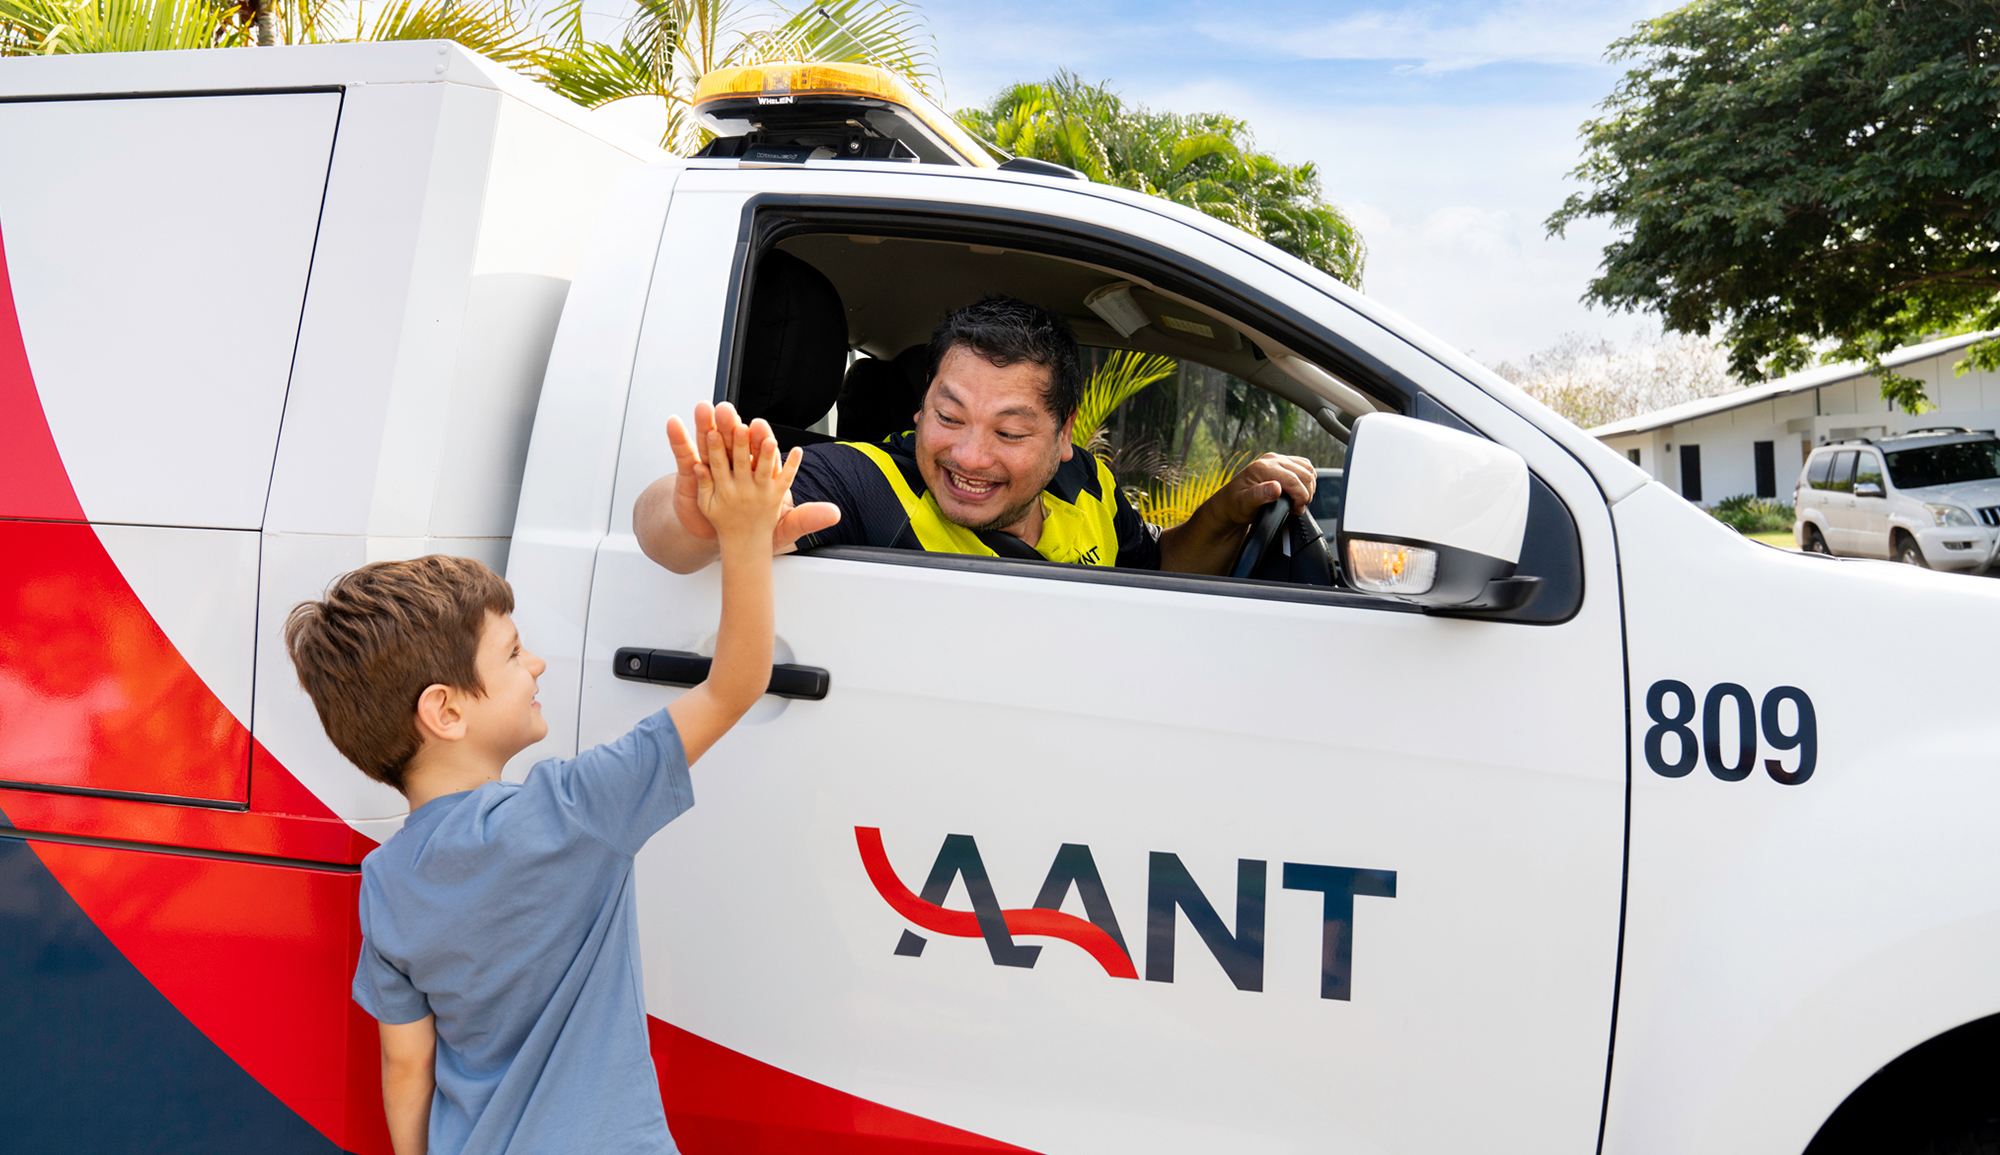 Kids giving a high-five to AANT patrol officer